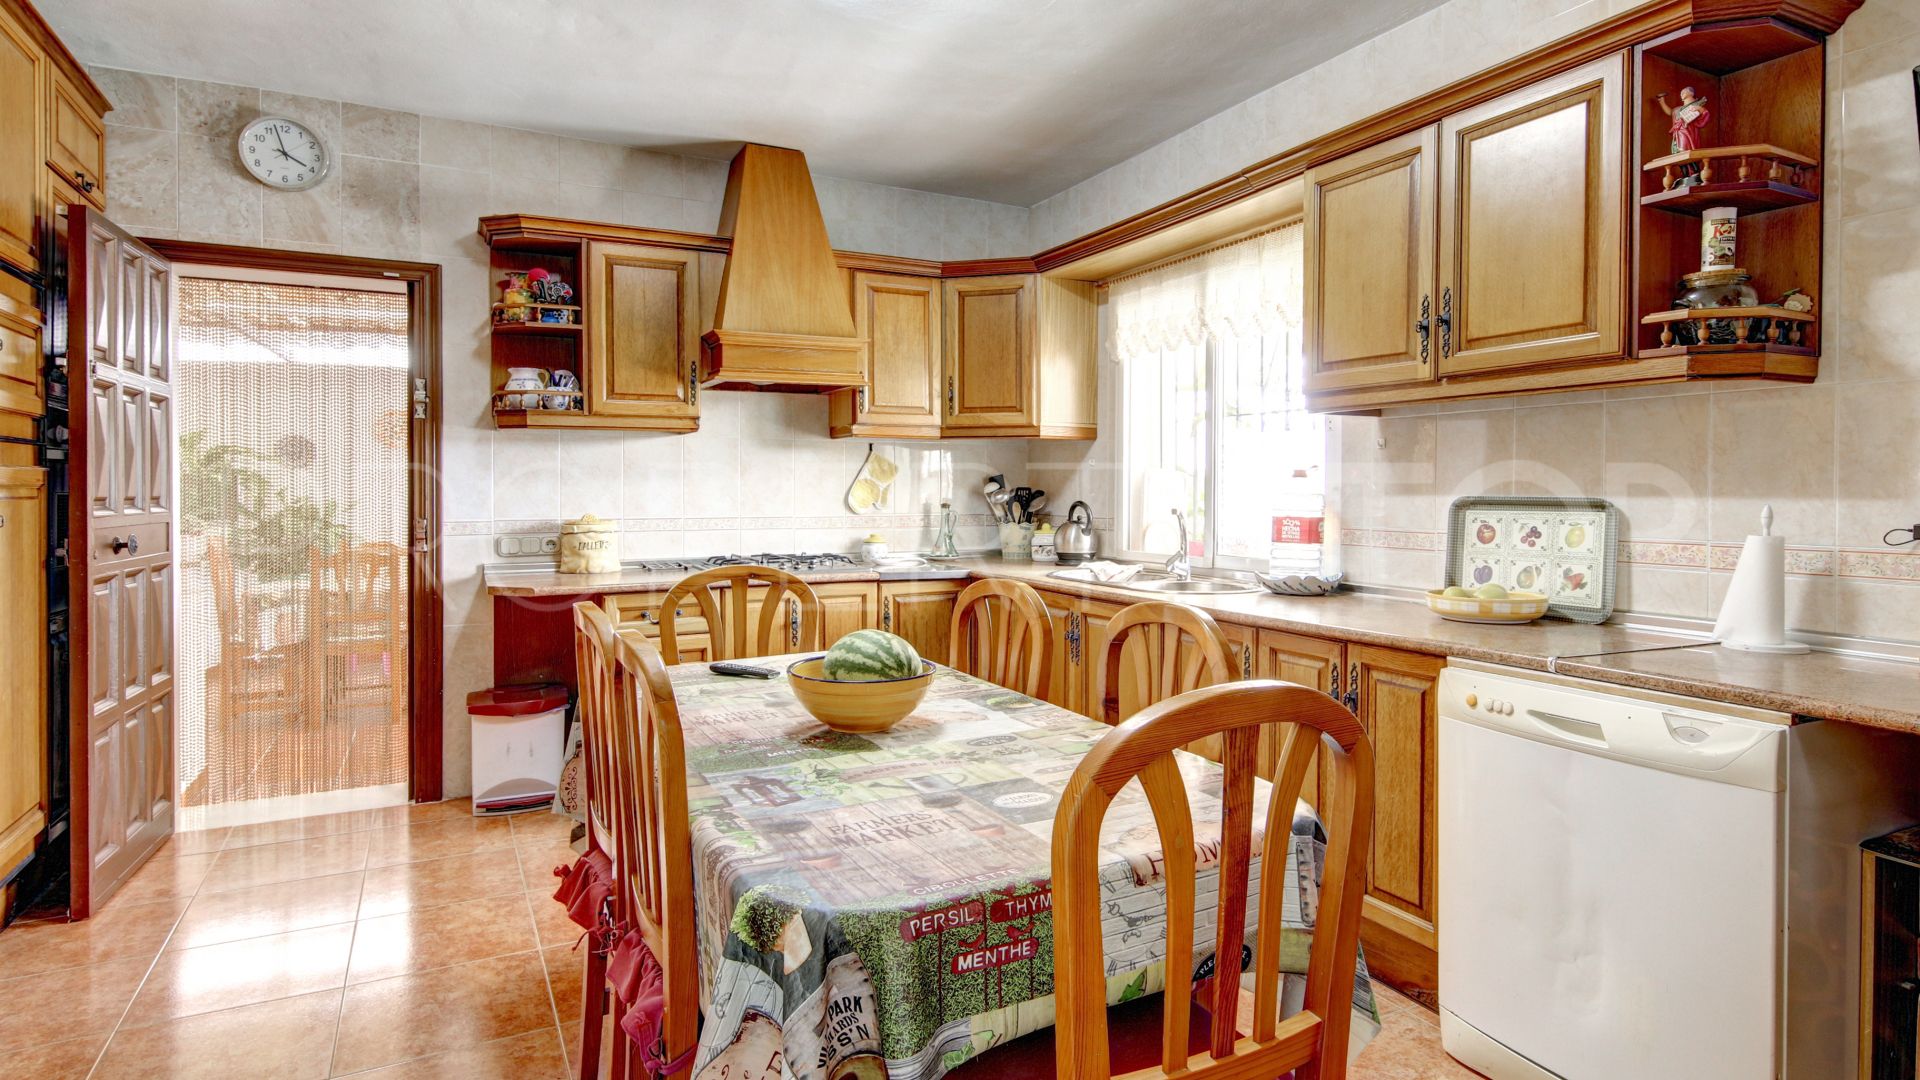 6 bedrooms country house in Estepona for sale